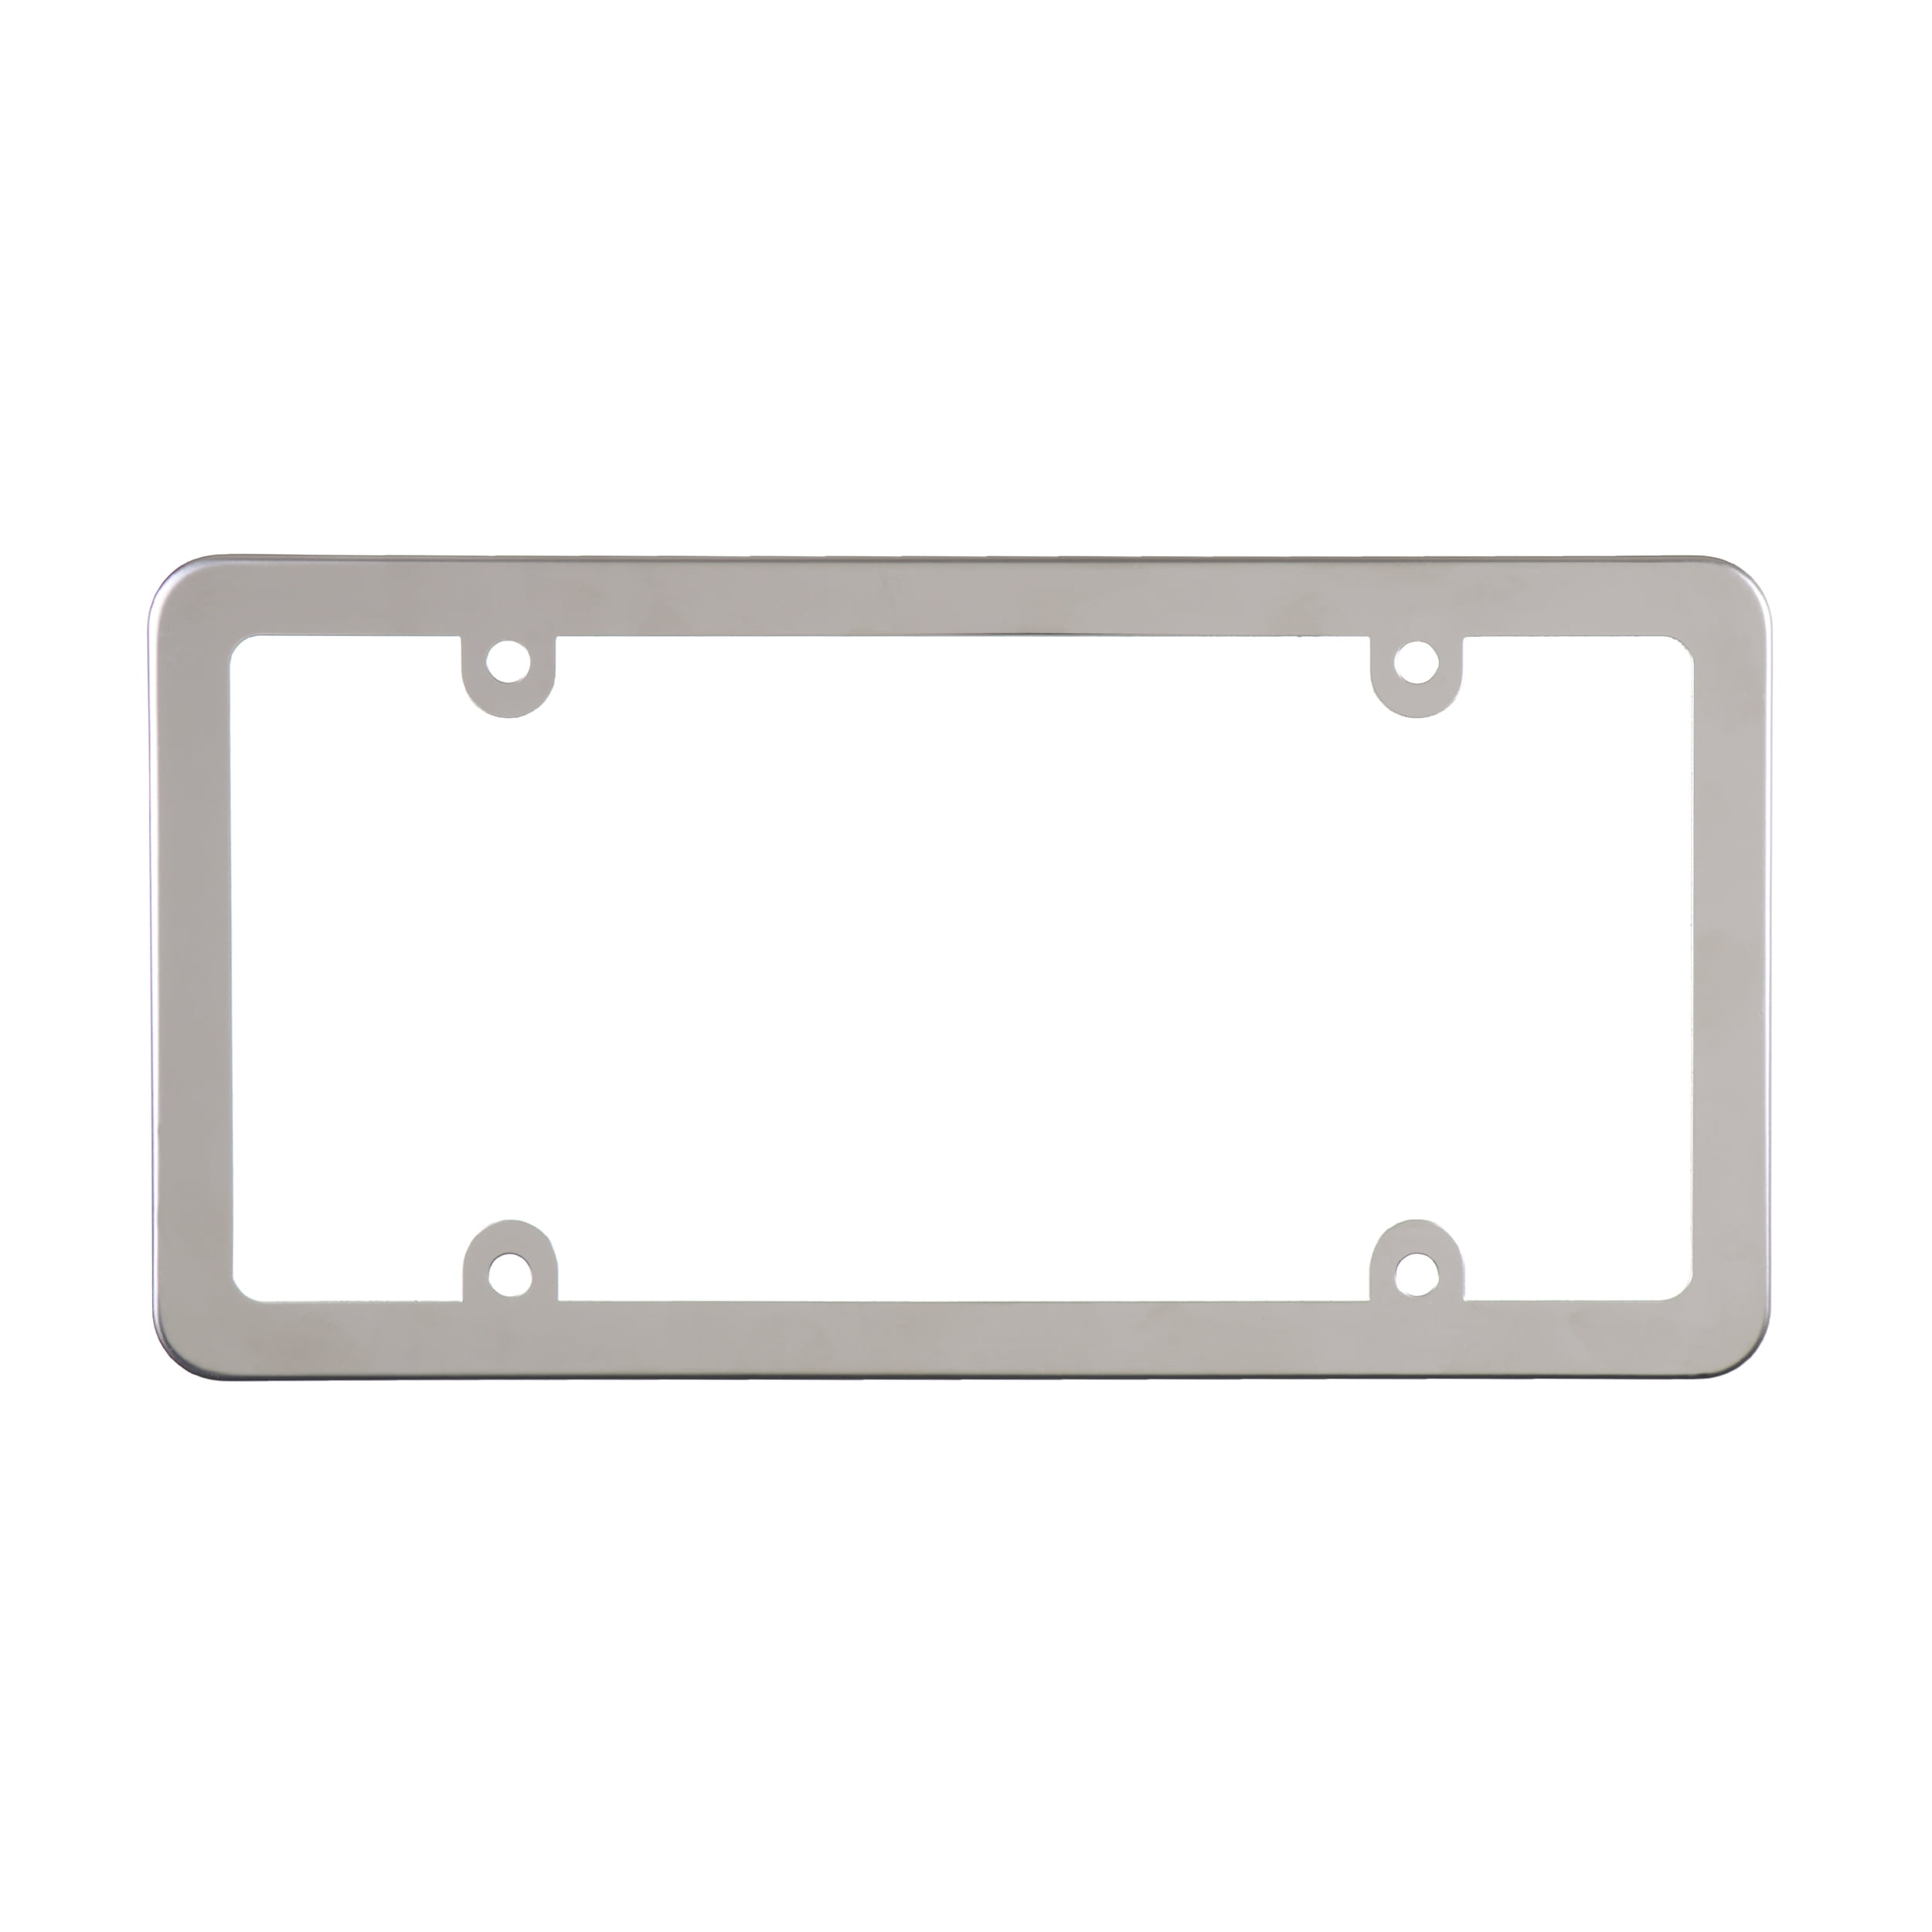 Auto Drive Stainless Steel Automotive License Plate Frame, 92017W